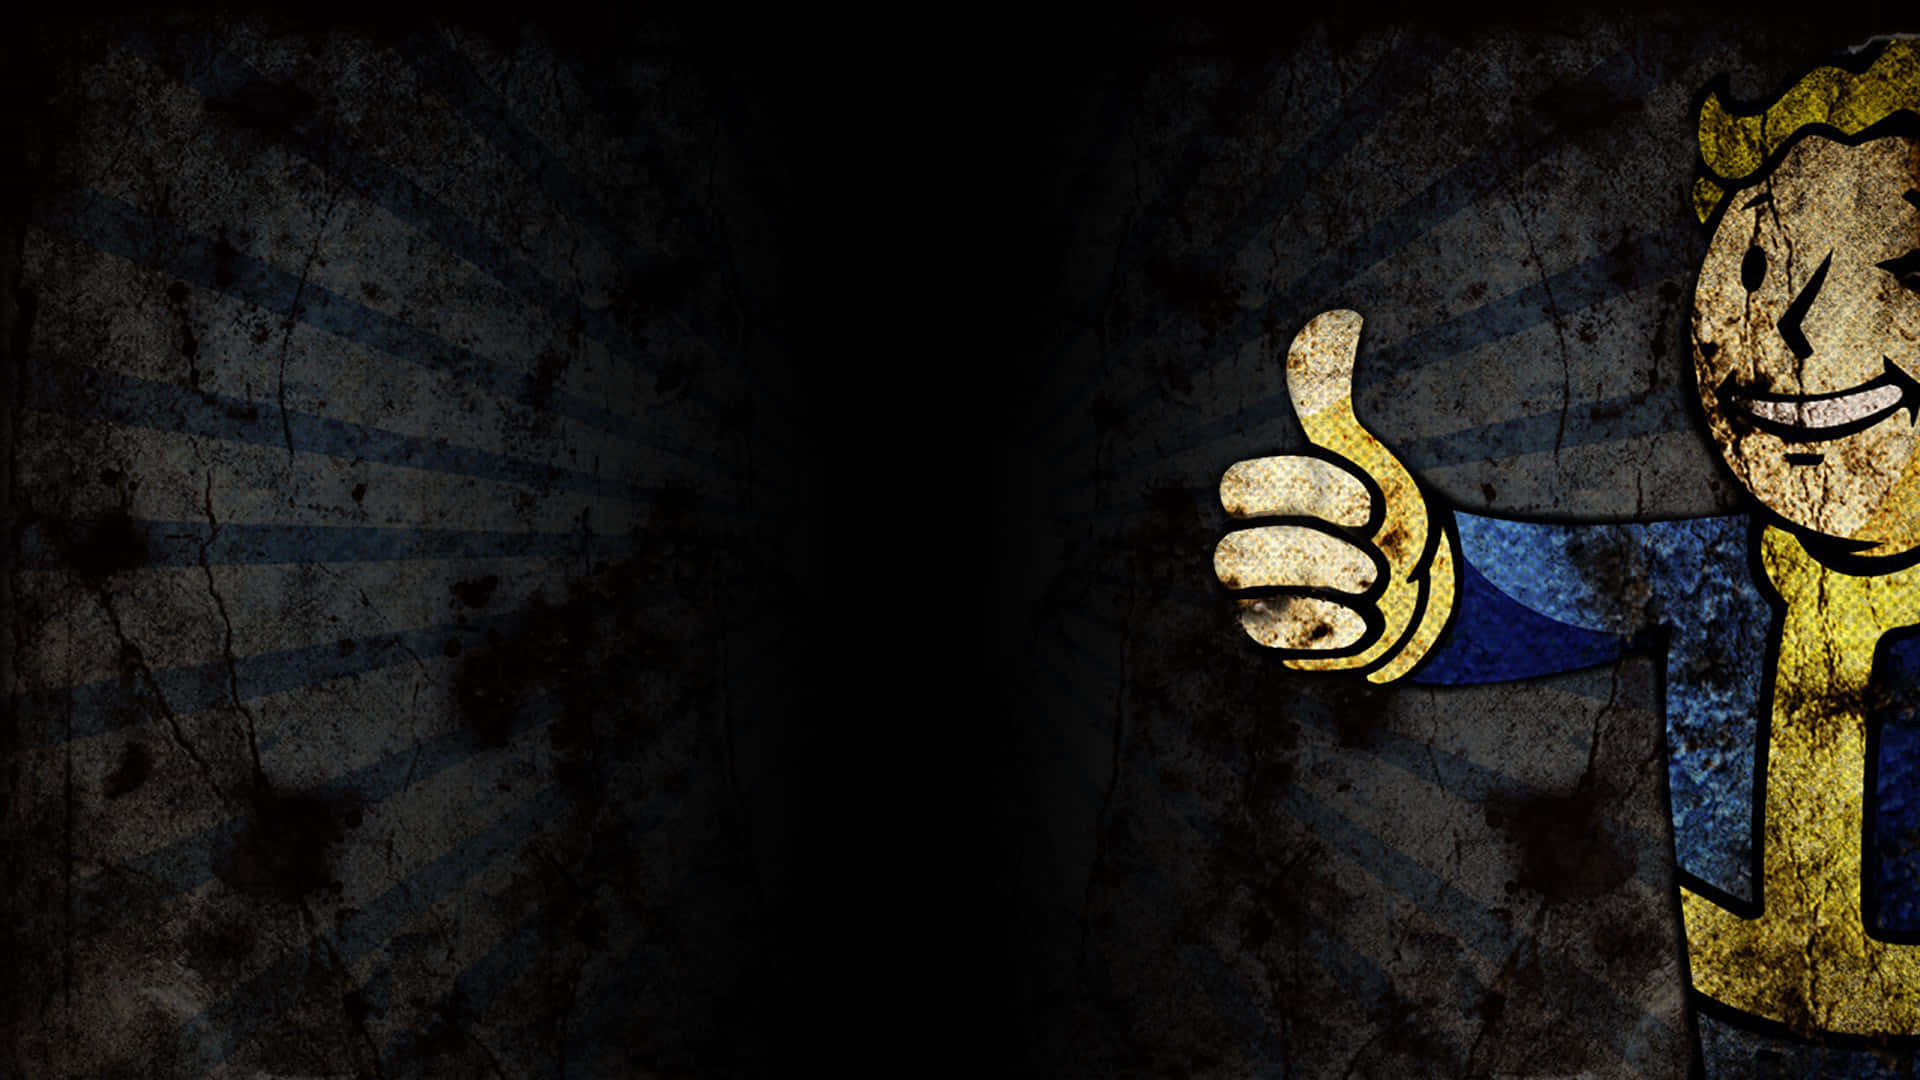 Image  Vault Boy from the Fallout Video Game Series Wallpaper